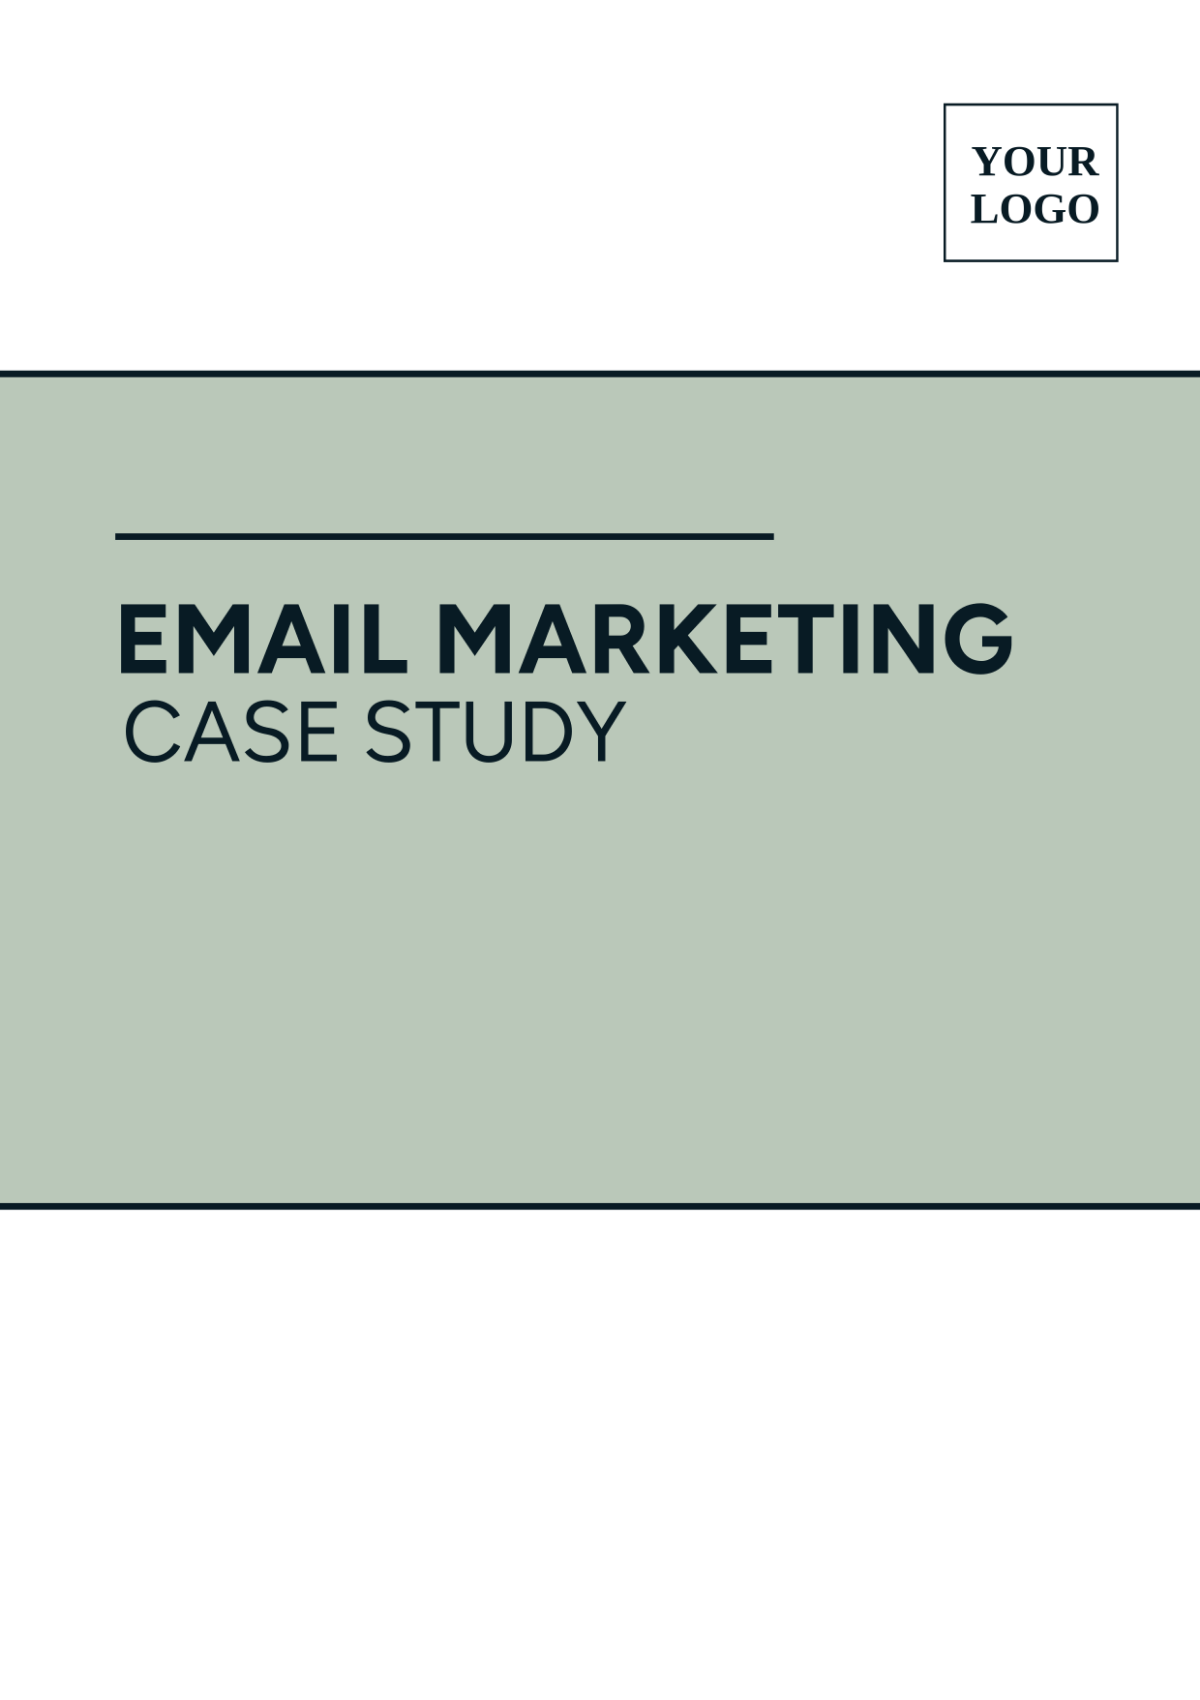 Email Marketing Case Study Template